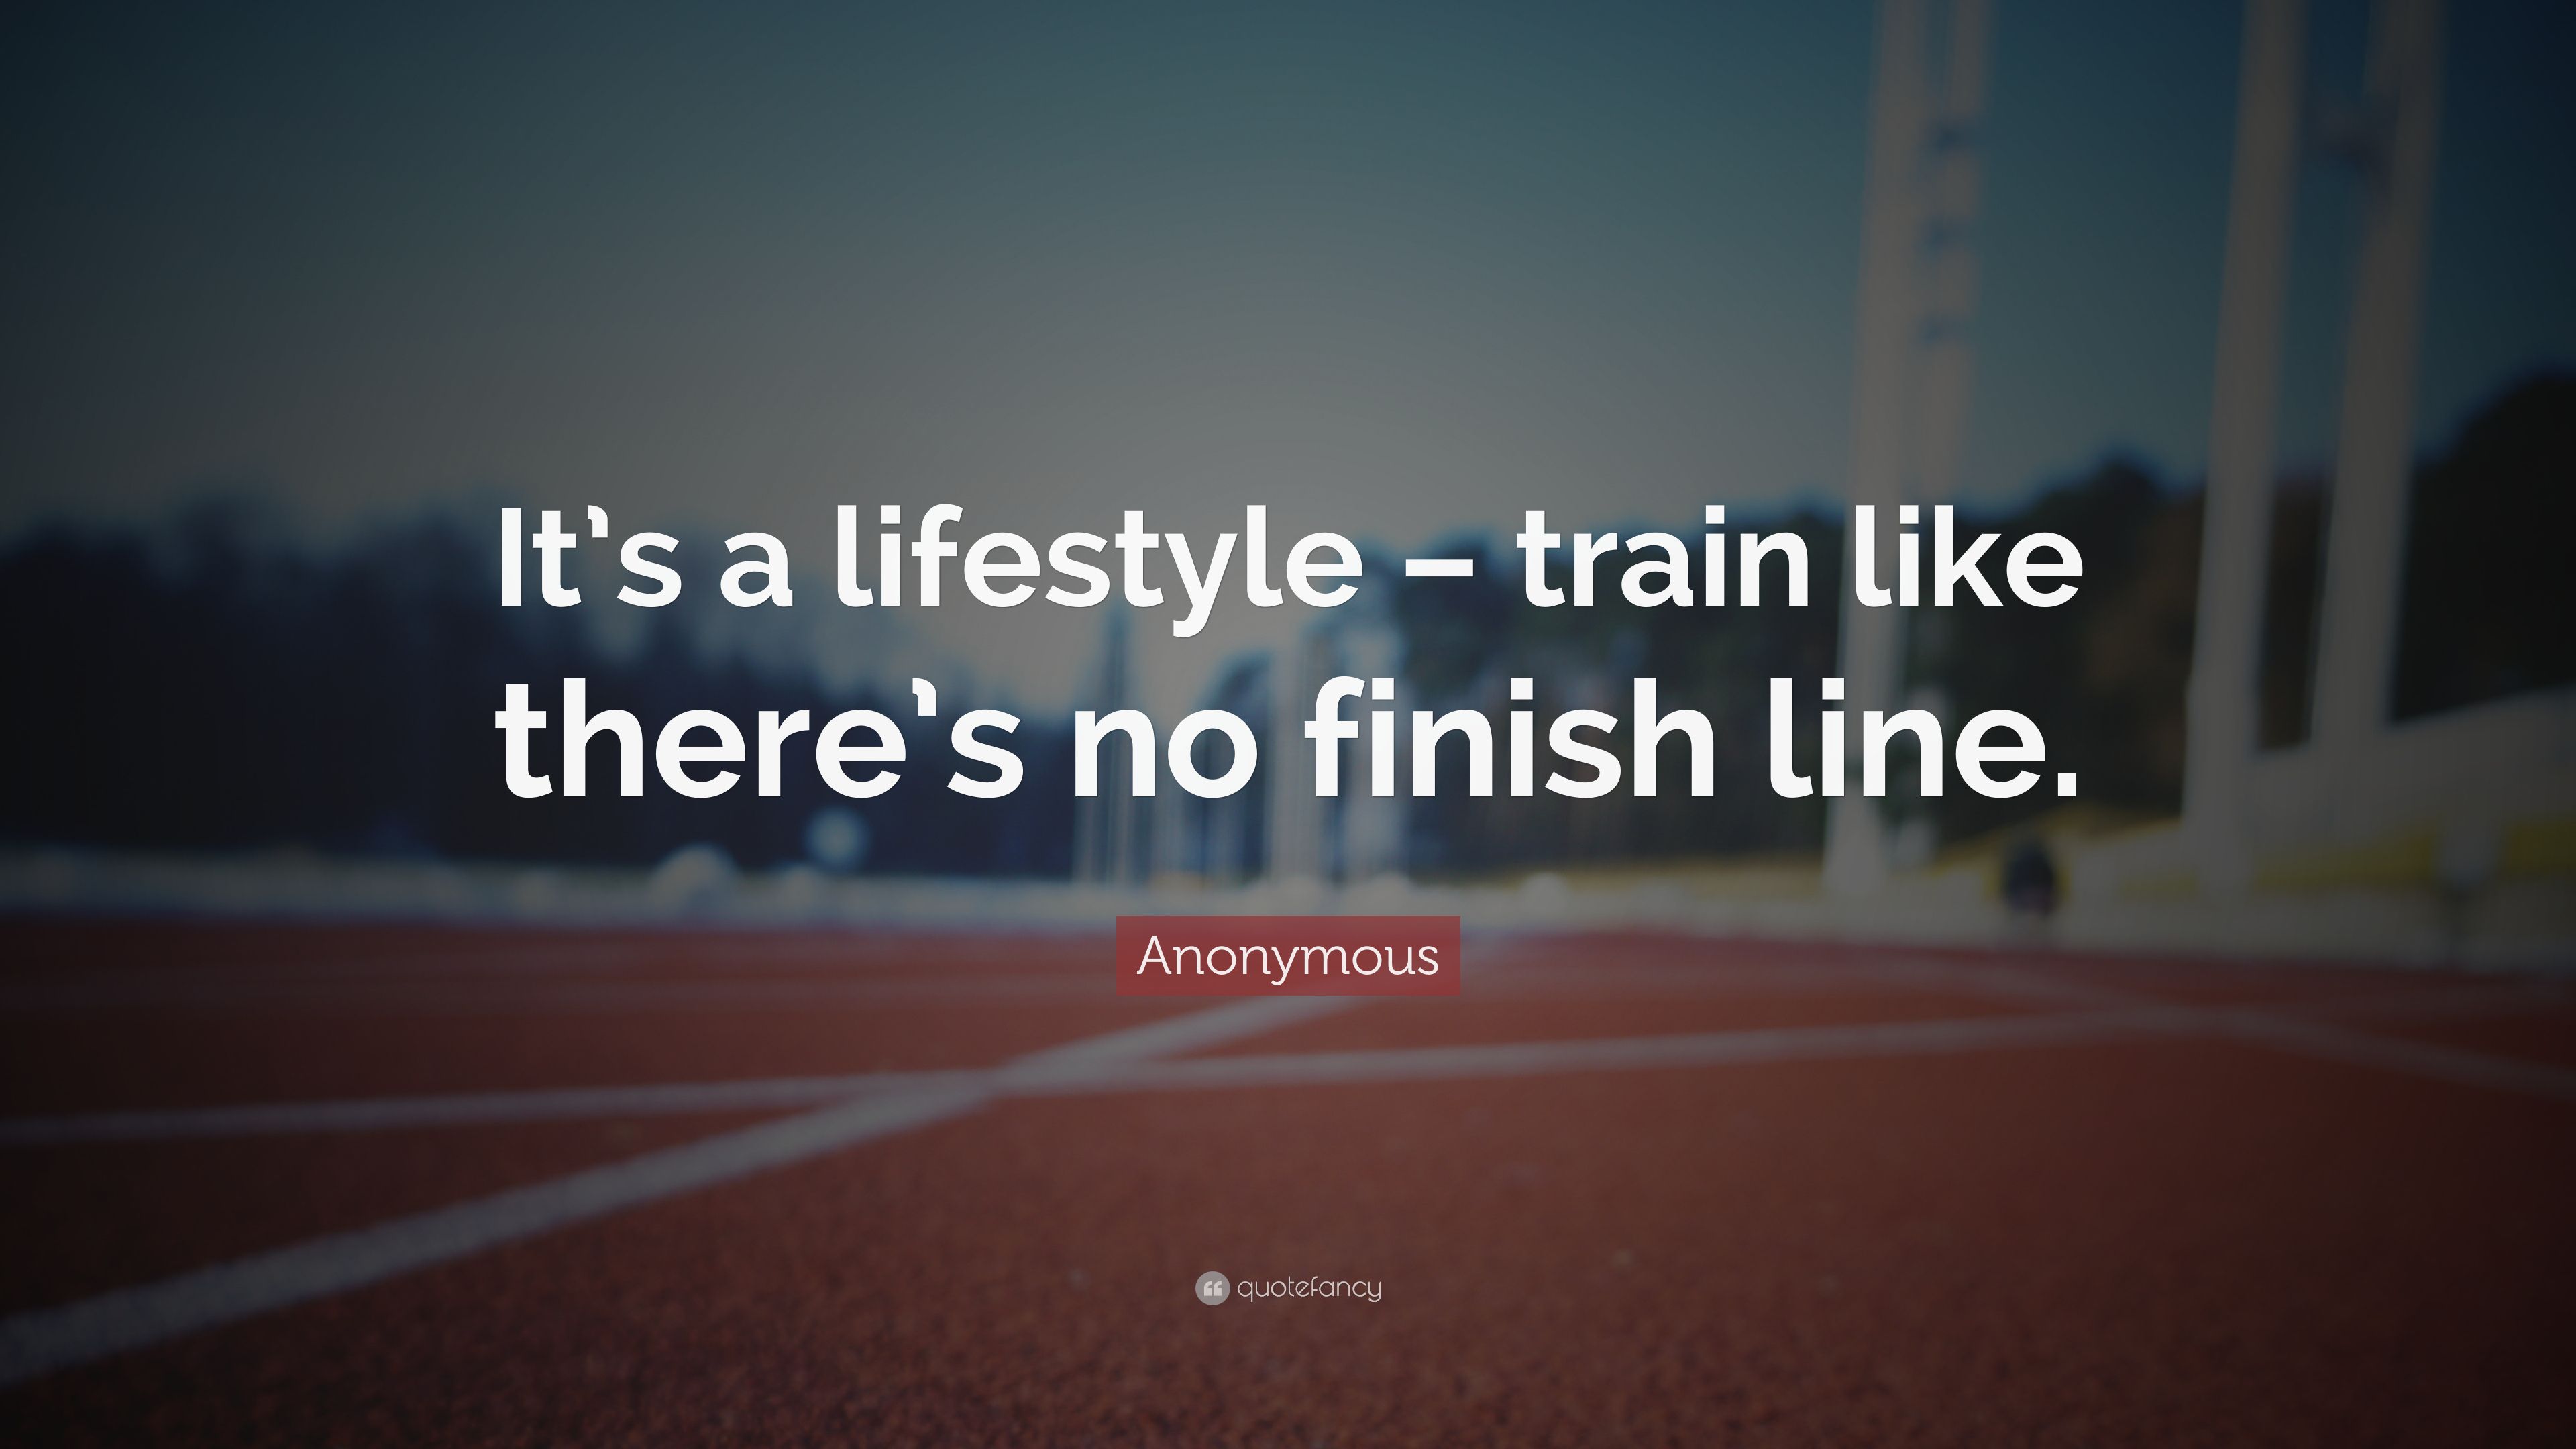 Anonymous Quote: “It's a lifestyle